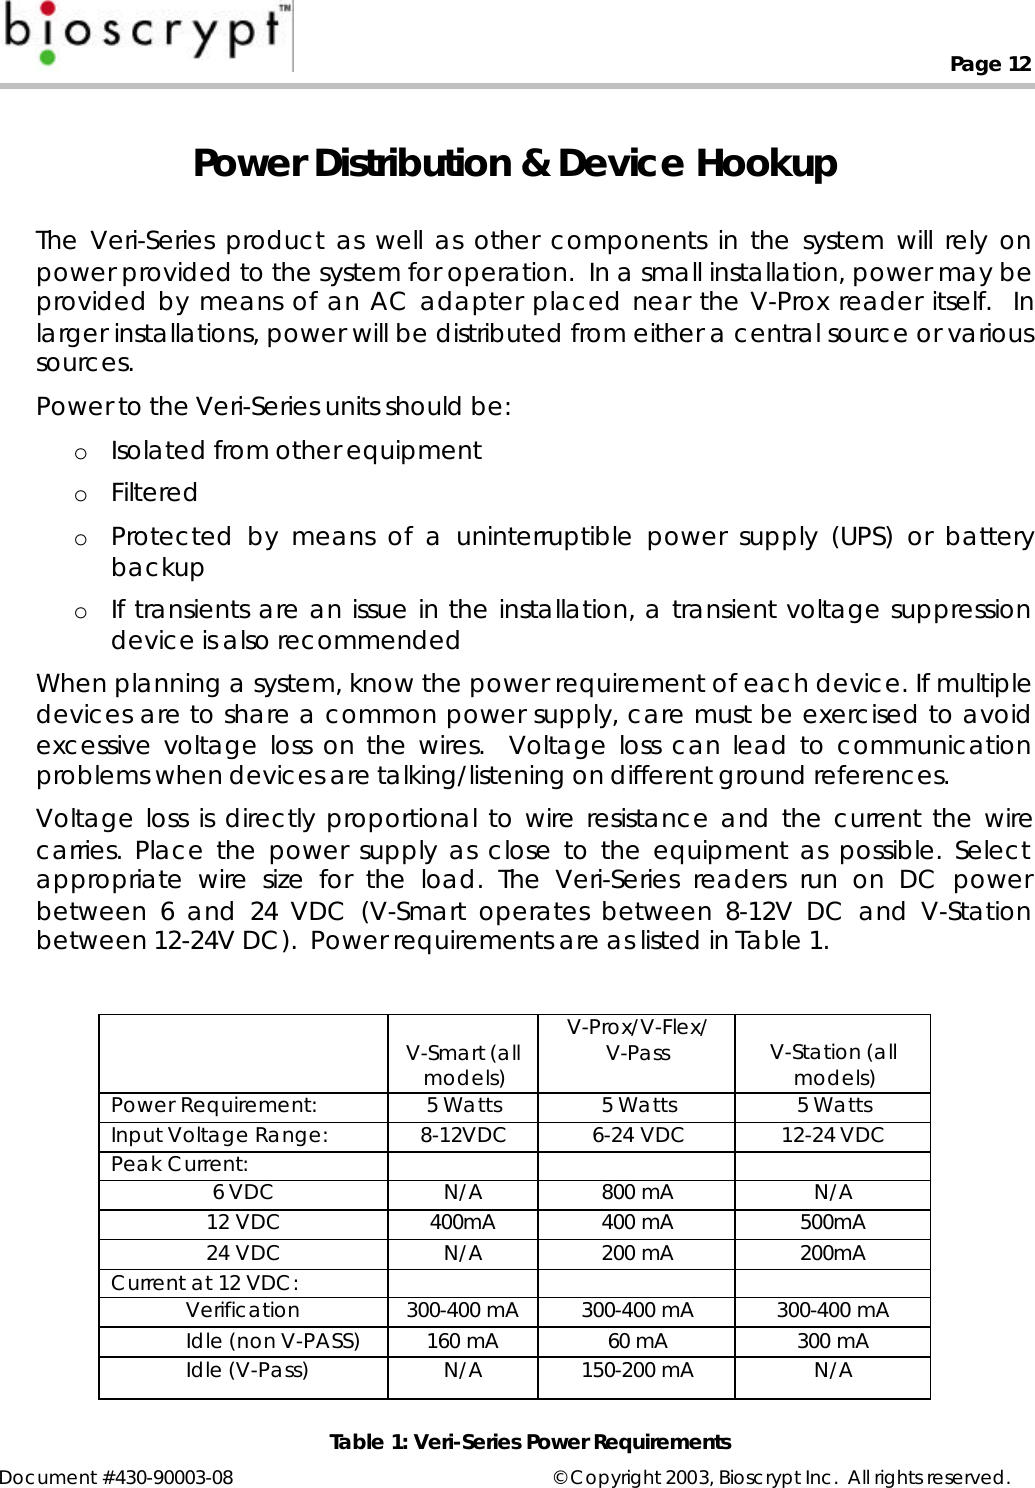 Page 12Document #430-90003-08 © Copyright 2003, Bioscrypt Inc.  All rights reserved.Power Distribution &amp; Device HookupThe Veri-Series product as well as other components in the system will rely onpower provided to the system for operation.  In a small installation, power may beprovided by means of an AC adapter placed near the V-Prox reader itself.  Inlarger installations, power will be distributed from either a central source or varioussources.Power to the Veri-Series units should be:o Isolated from other equipmento Filteredo Protected by means of a uninterruptible power supply (UPS) or batterybackupo If transients are an issue in the installation, a transient voltage suppressiondevice is also recommendedWhen planning a system, know the power requirement of each device. If multipledevices are to share a common power supply, care must be exercised to avoidexcessive voltage loss on the wires.  Voltage loss can lead to communicationproblems when devices are talking/listening on different ground references.Voltage loss is directly proportional to wire resistance and the current the wirecarries. Place the power supply as close to the equipment as possible. Selectappropriate wire size for the load. The Veri-Series readers run on DC powerbetween 6 and 24 VDC (V-Smart operates between 8-12V DC and V-Stationbetween 12-24V DC).  Power requirements are as listed in Table 1.V-Smart (allmodels)V-Prox/V-Flex/V-Pass V-Station (allmodels)Power Requirement: 5 Watts 5 Watts 5 WattsInput Voltage Range: 8-12VDC 6-24 VDC 12-24 VDCPeak Current:6 VDC N/A 800 mA N/A12 VDC 400mA 400 mA 500mA24 VDC N/A 200 mA 200mACurrent at 12 VDC:Verification 300-400 mA 300-400 mA 300-400 mAIdle (non V-PASS) 160 mA 60 mA 300 mAIdle (V-Pass) N/A 150-200 mA N/ATable 1: Veri-Series Power Requirements